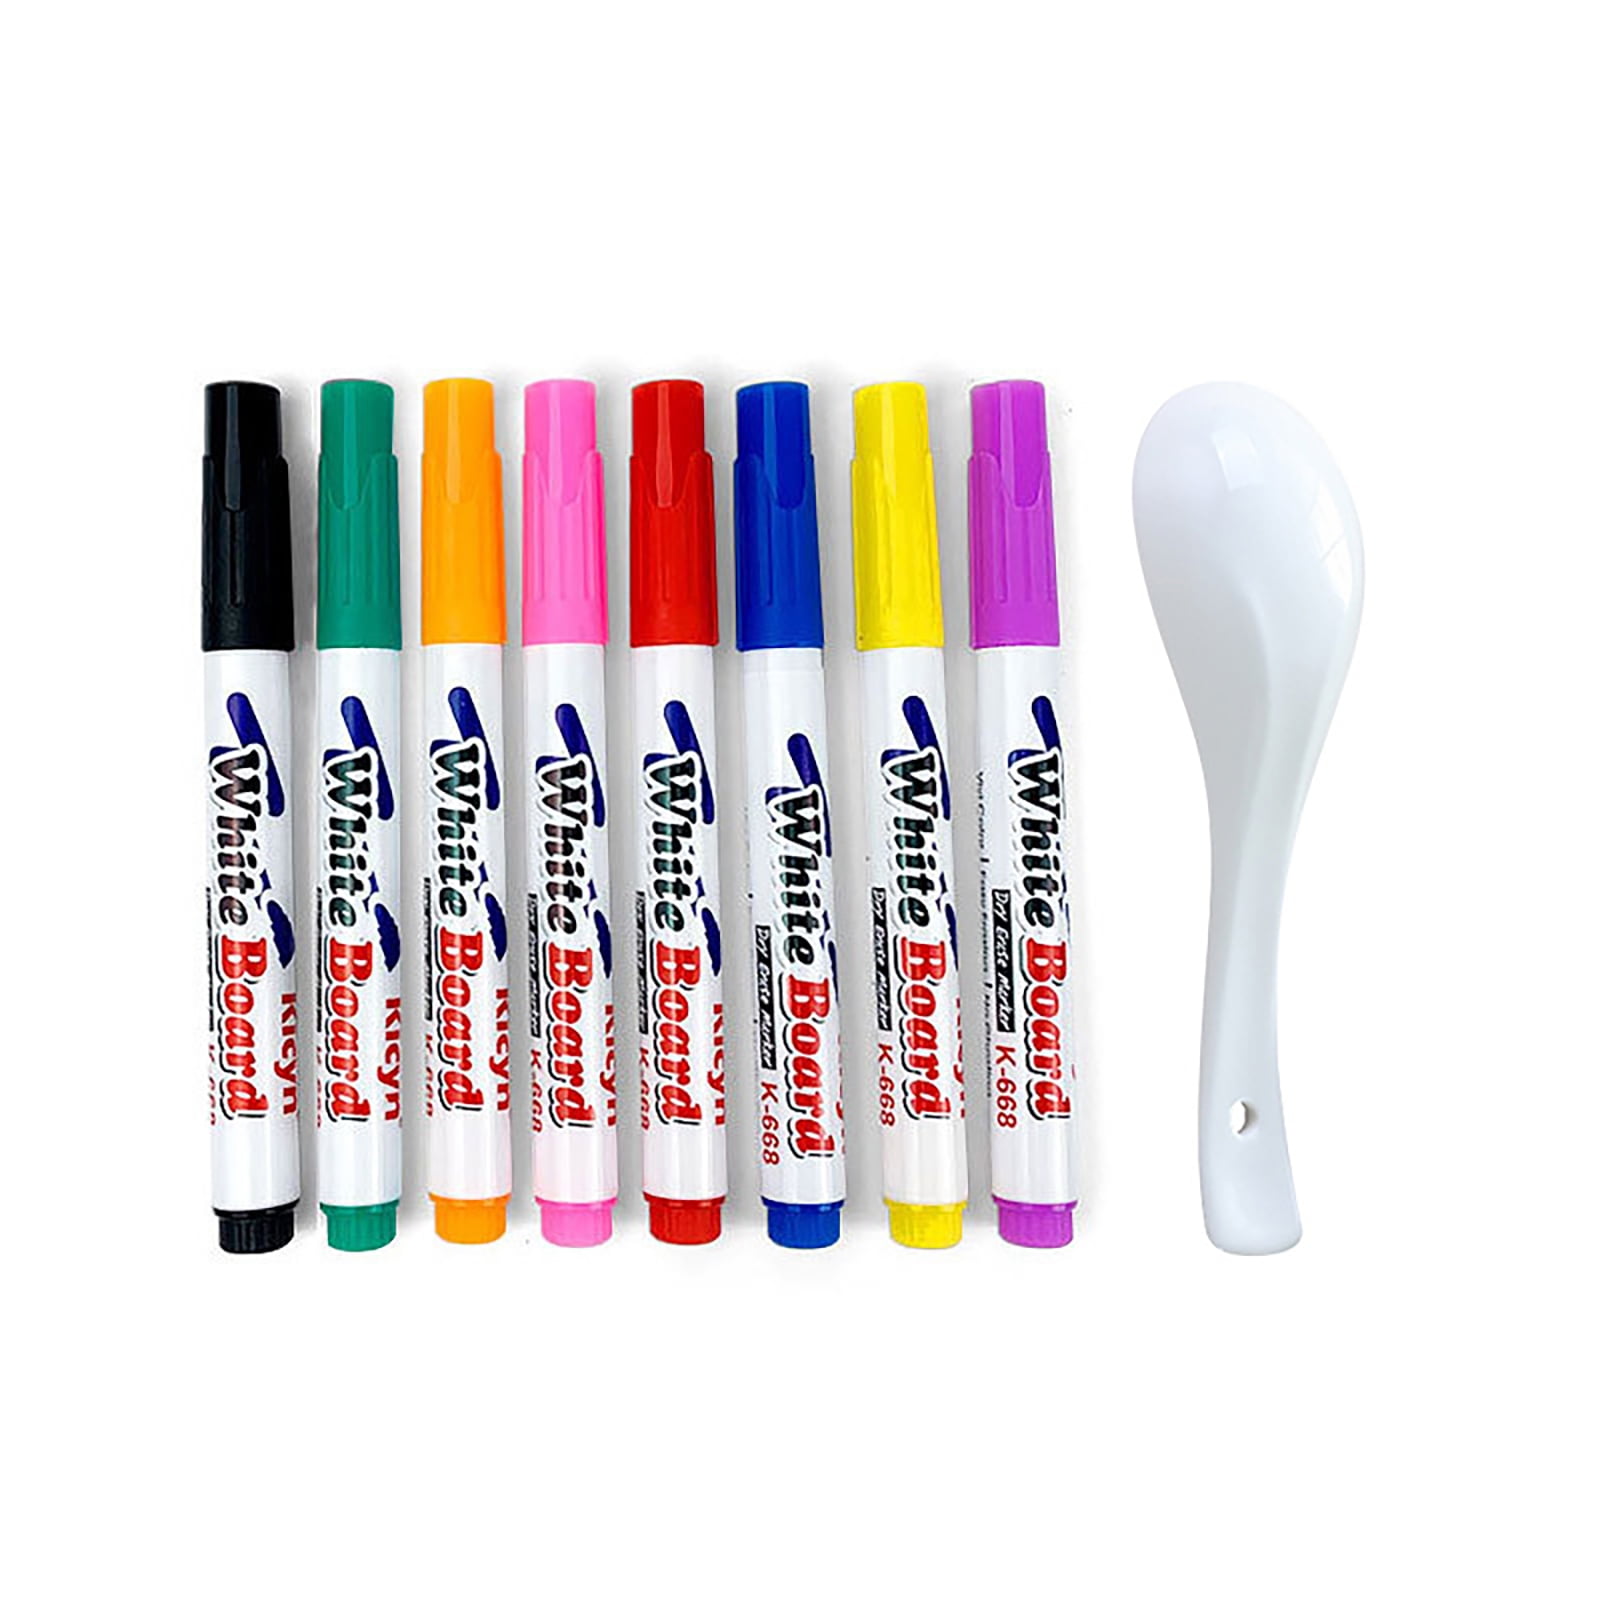 Magic Water Painting Markers - Floating Ink Pens For Kids 11 Colors, दरवाजा  की किट, डोर किट - Eshwar Shop, Madurai